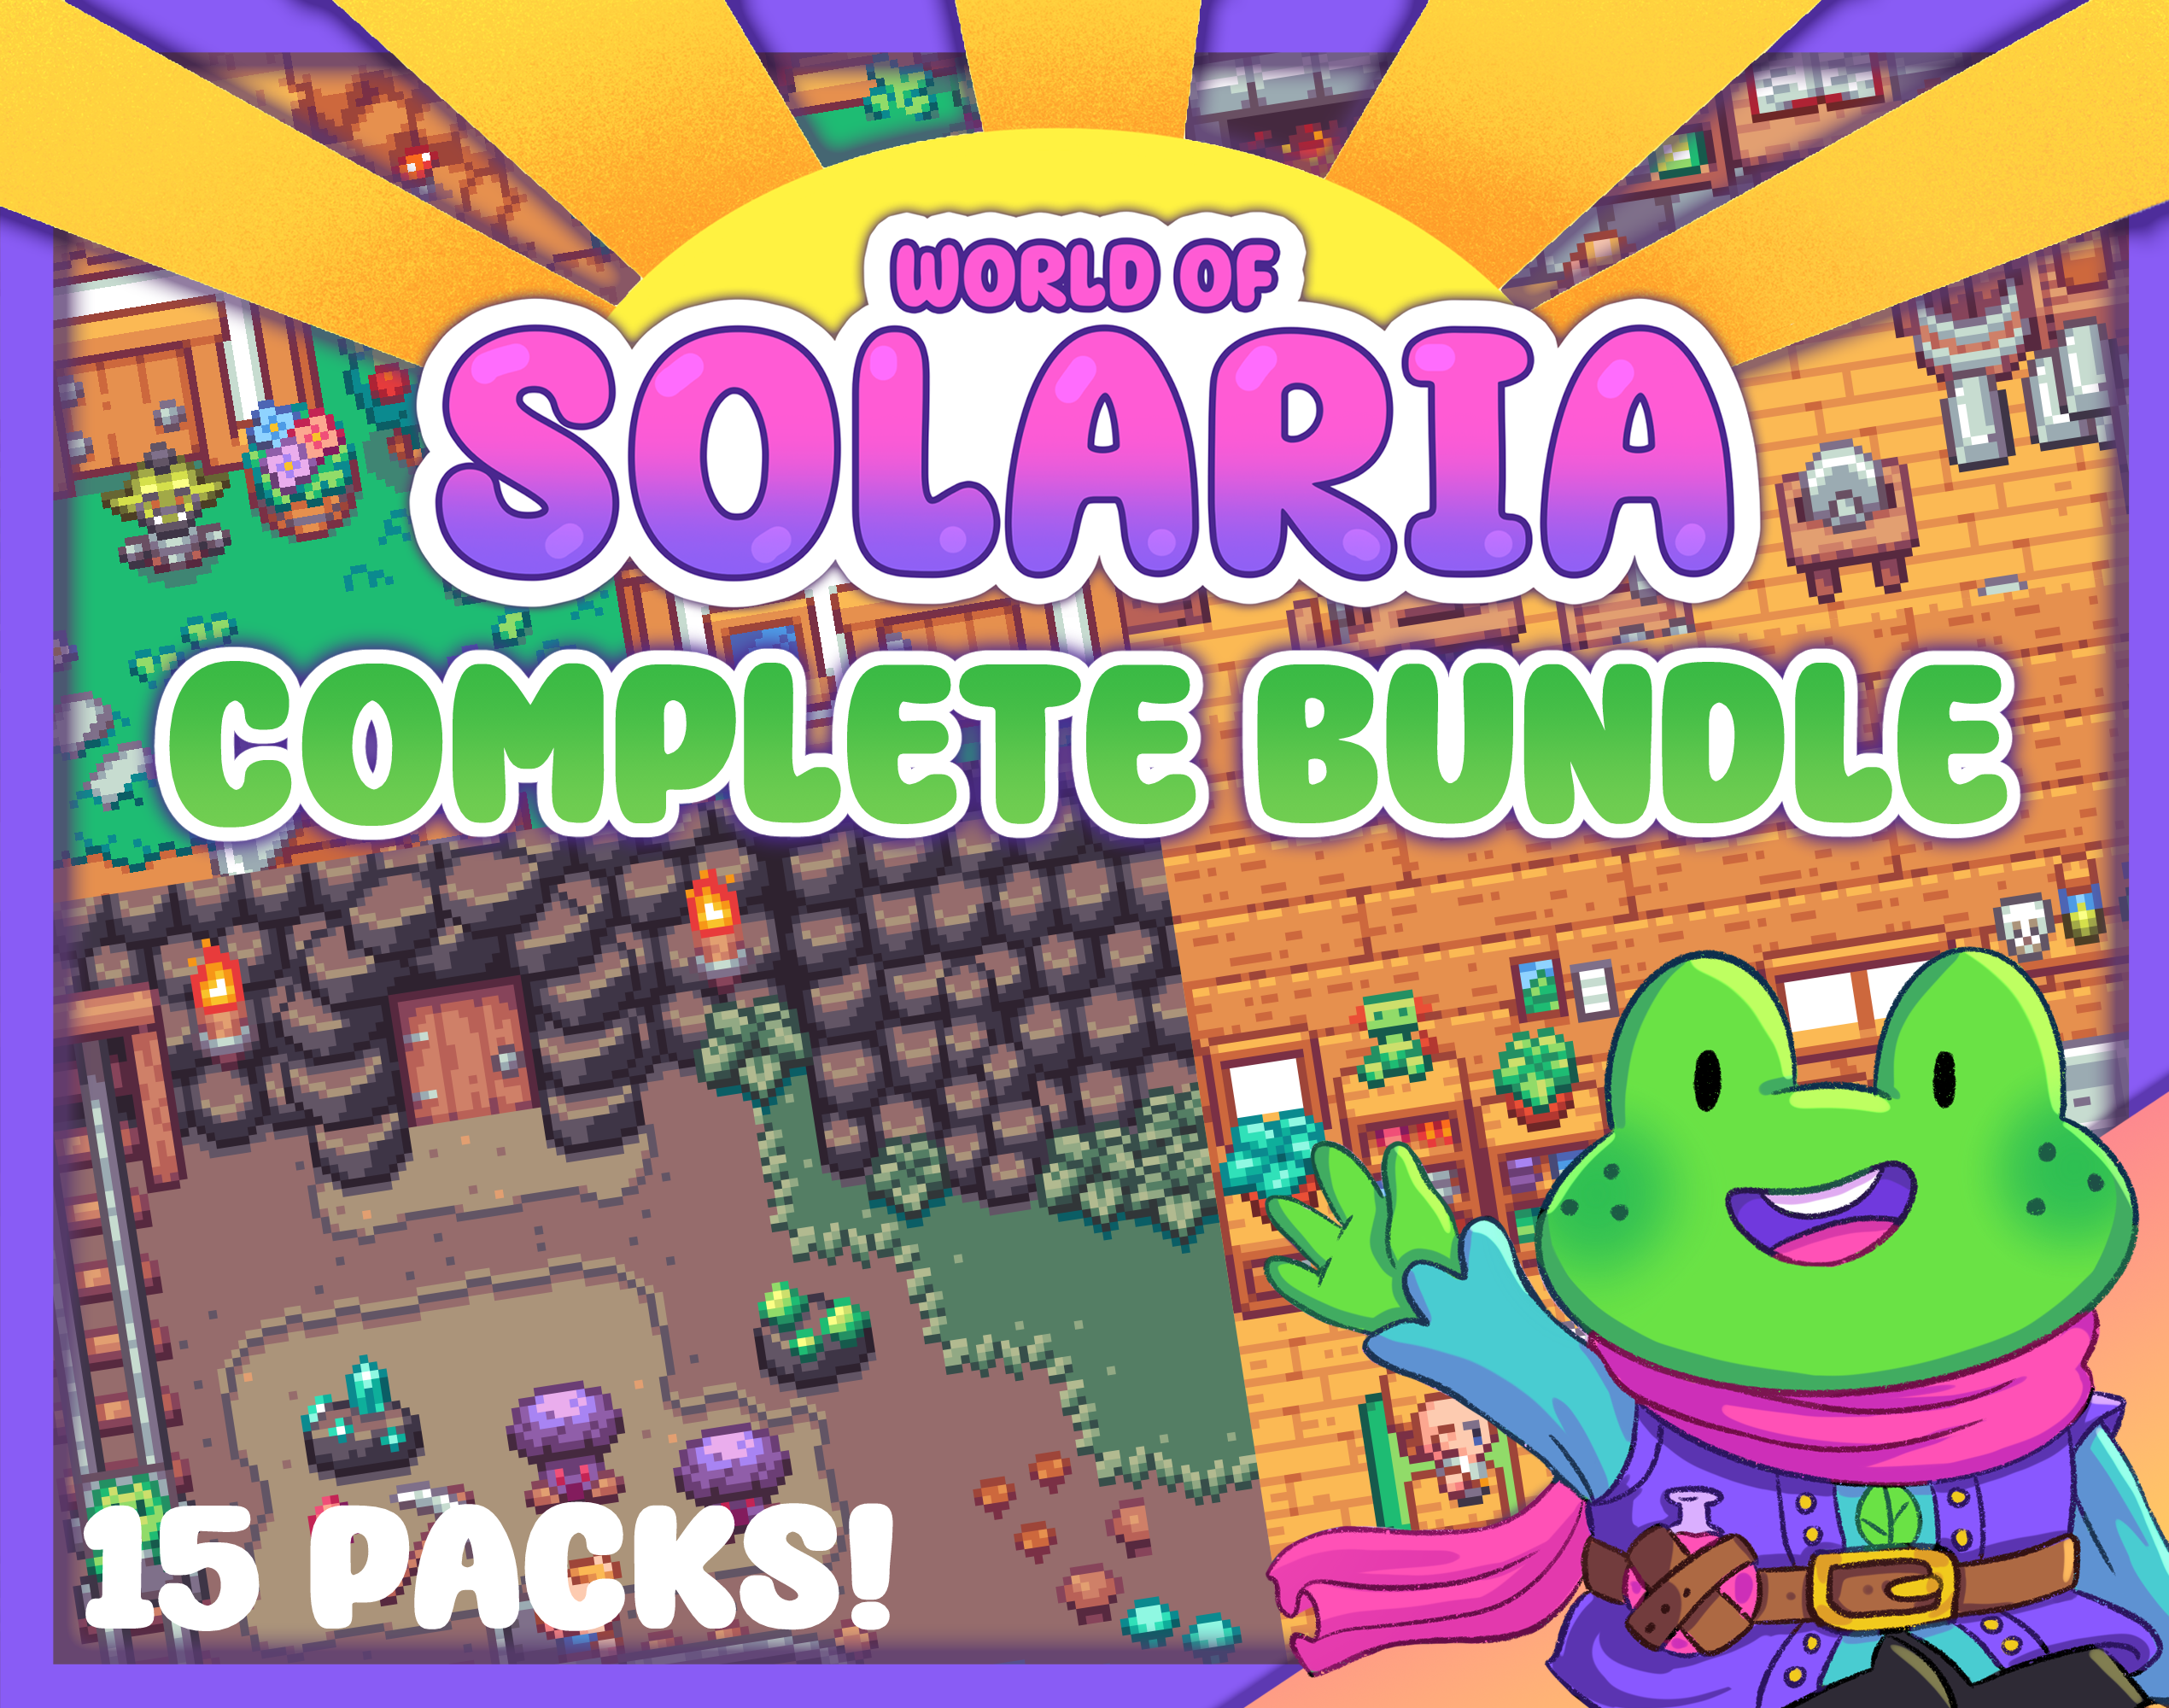 A thumbnail for Jamie Brownhill's World of Solaria Tileset Bundle. A small green anthropomorphic frog waves at the viewer. In the background is a collage of pixel art scenes, indicating items included in the bundle.